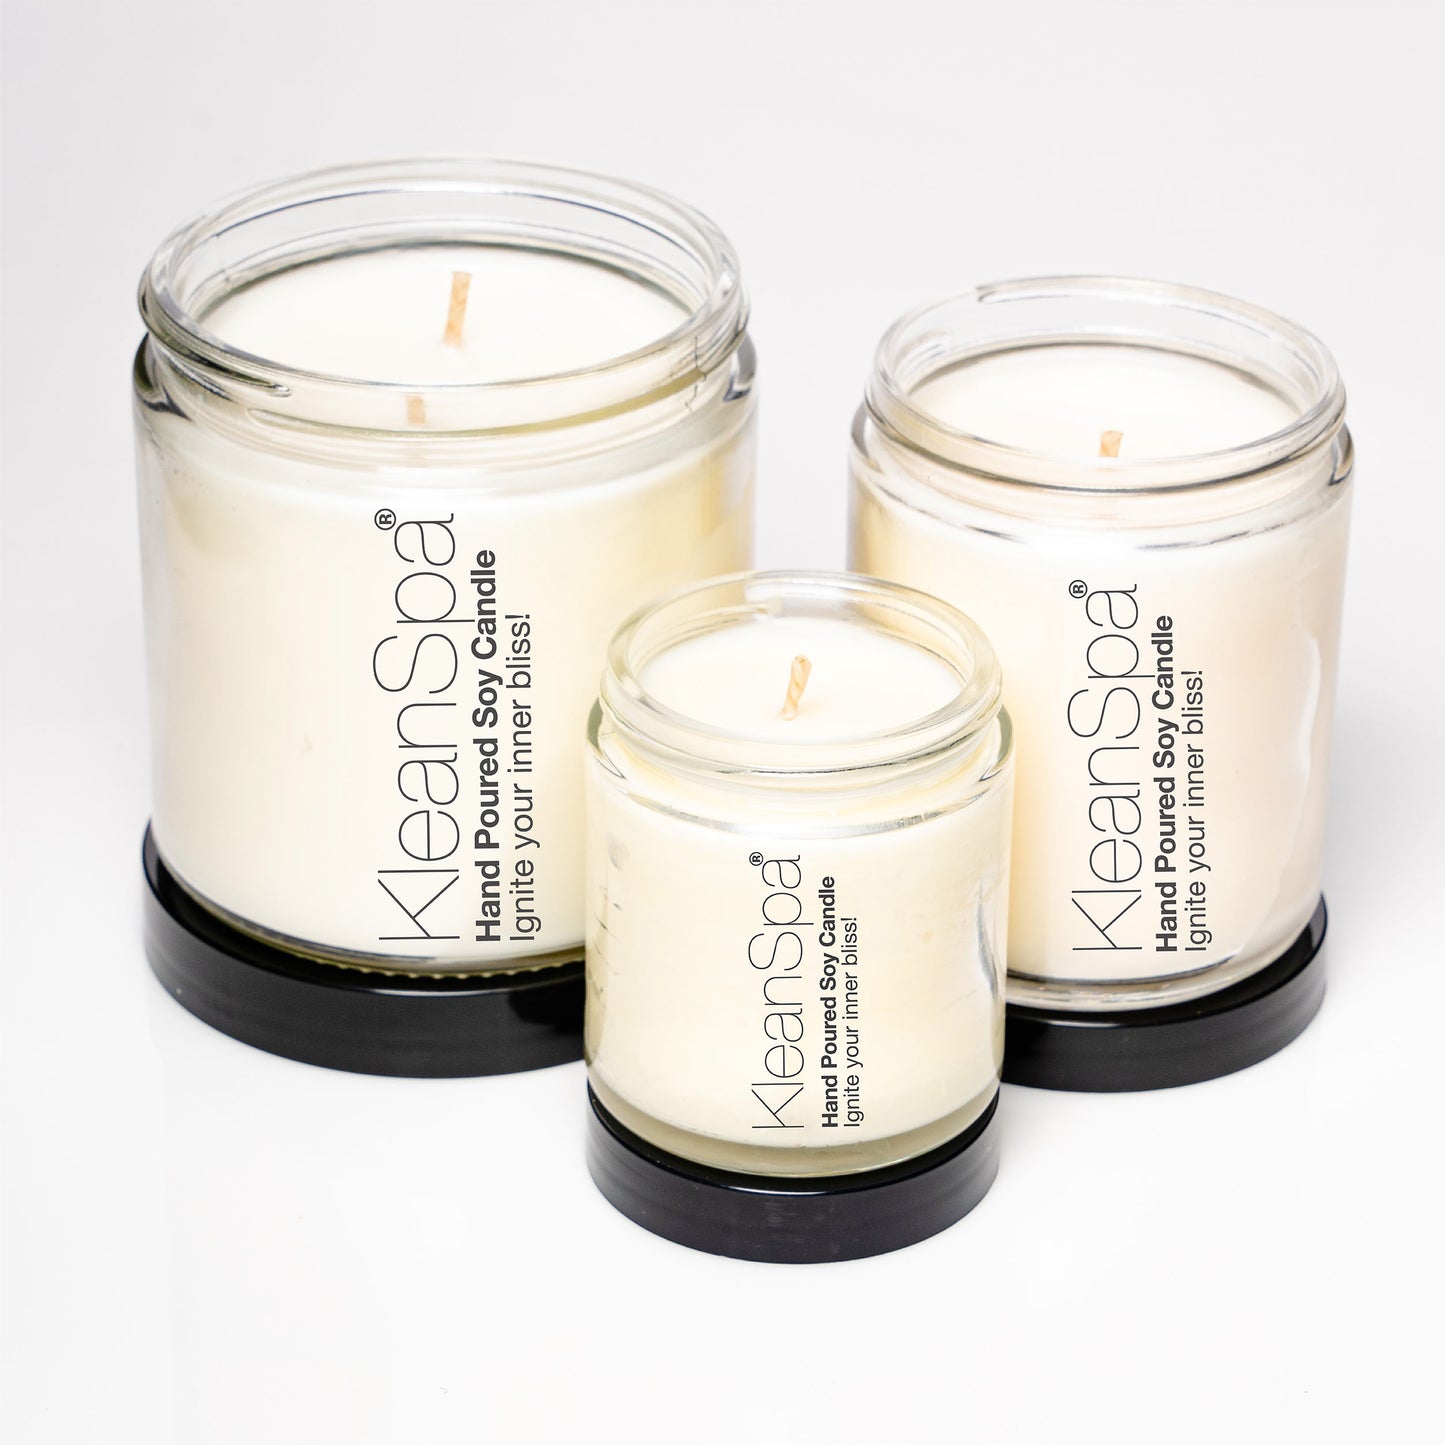 eco-friendly, natural soy candles